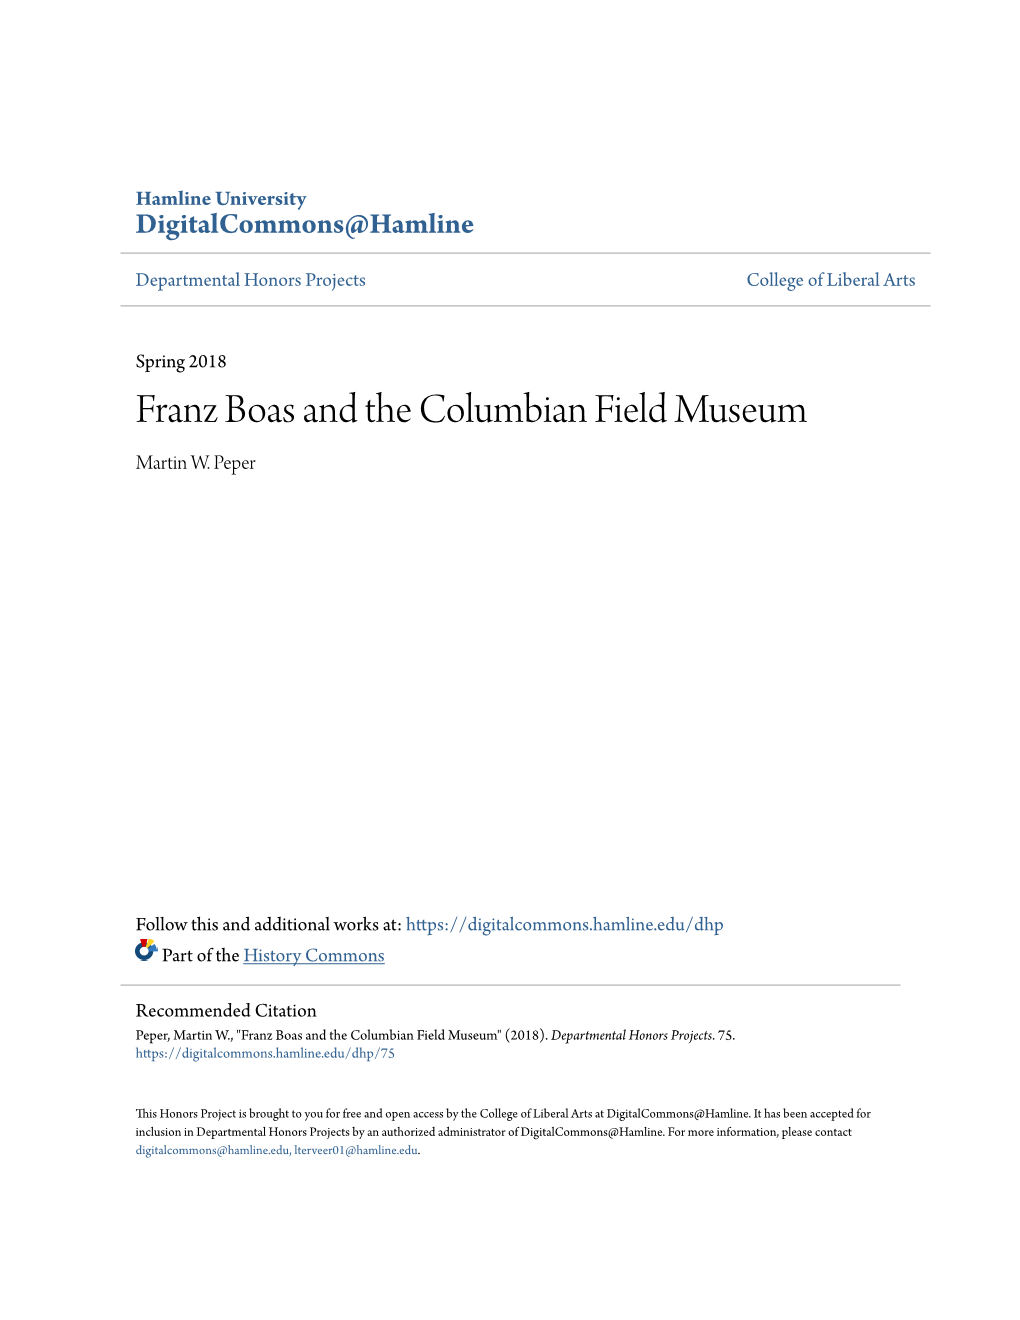 Franz Boas and the Columbian Field Museum Martin W